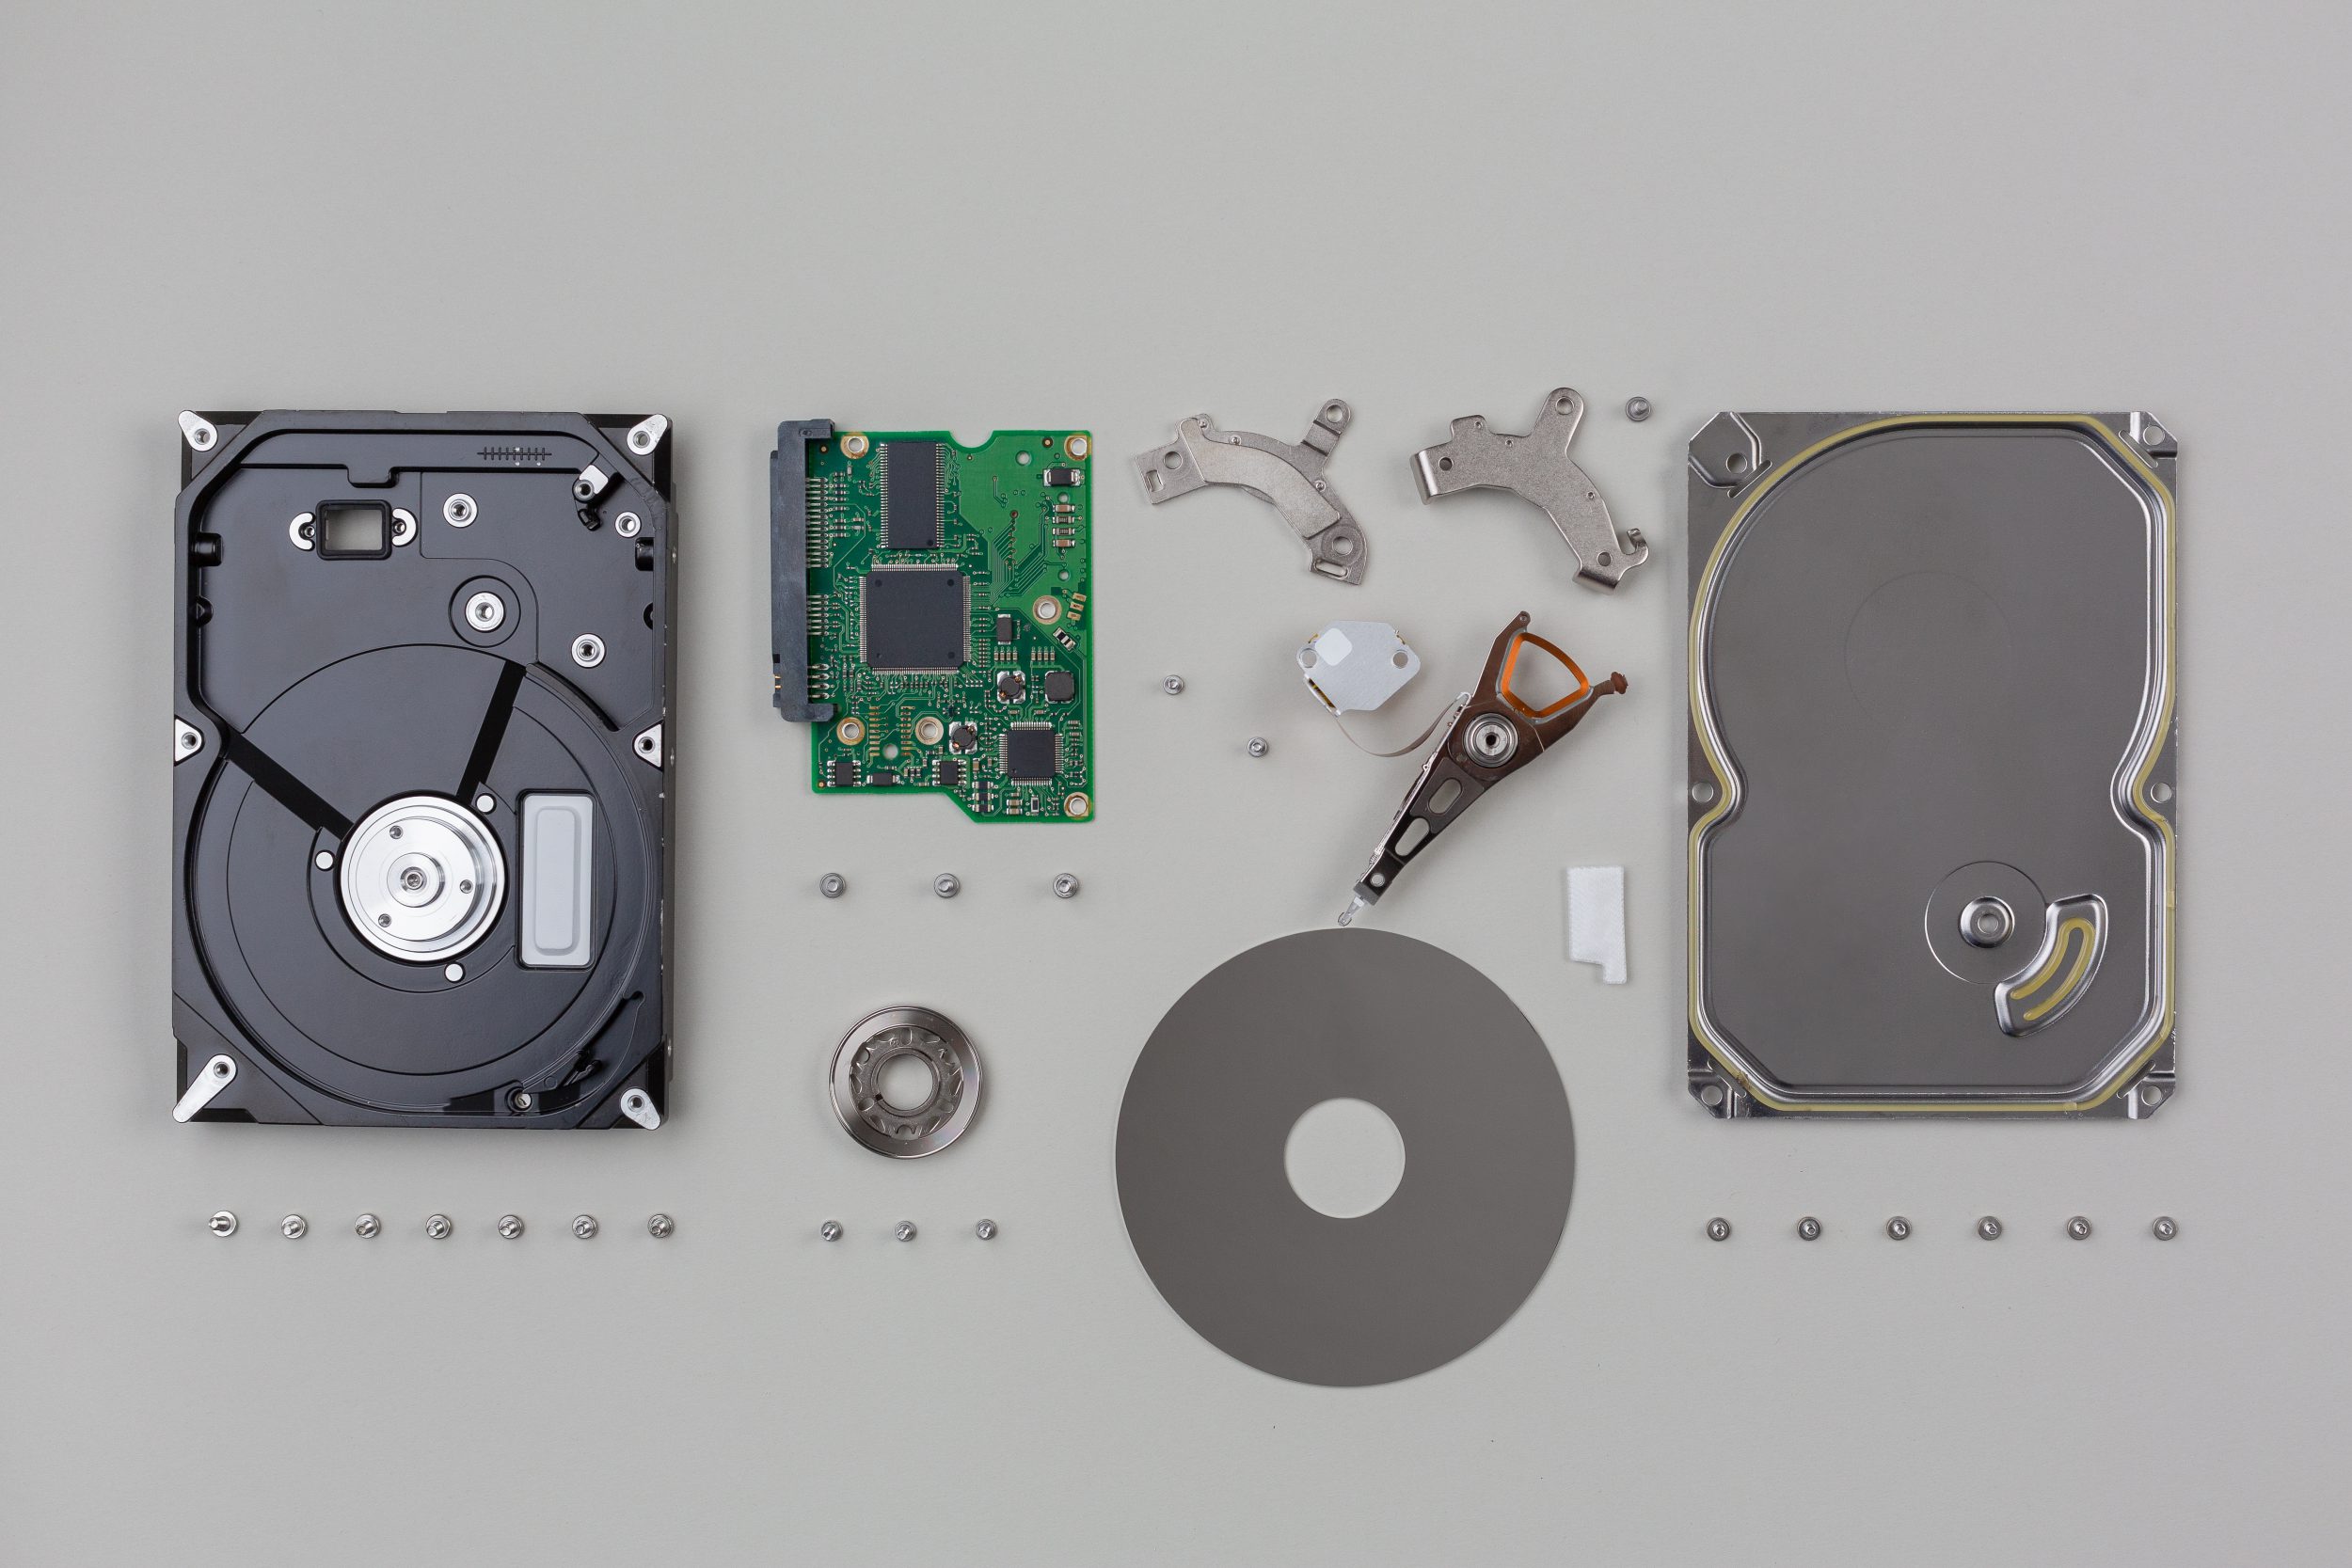 parts of a hard disk belonging to custom medical computer hardware, exploded one by one and arranged on a neutral background